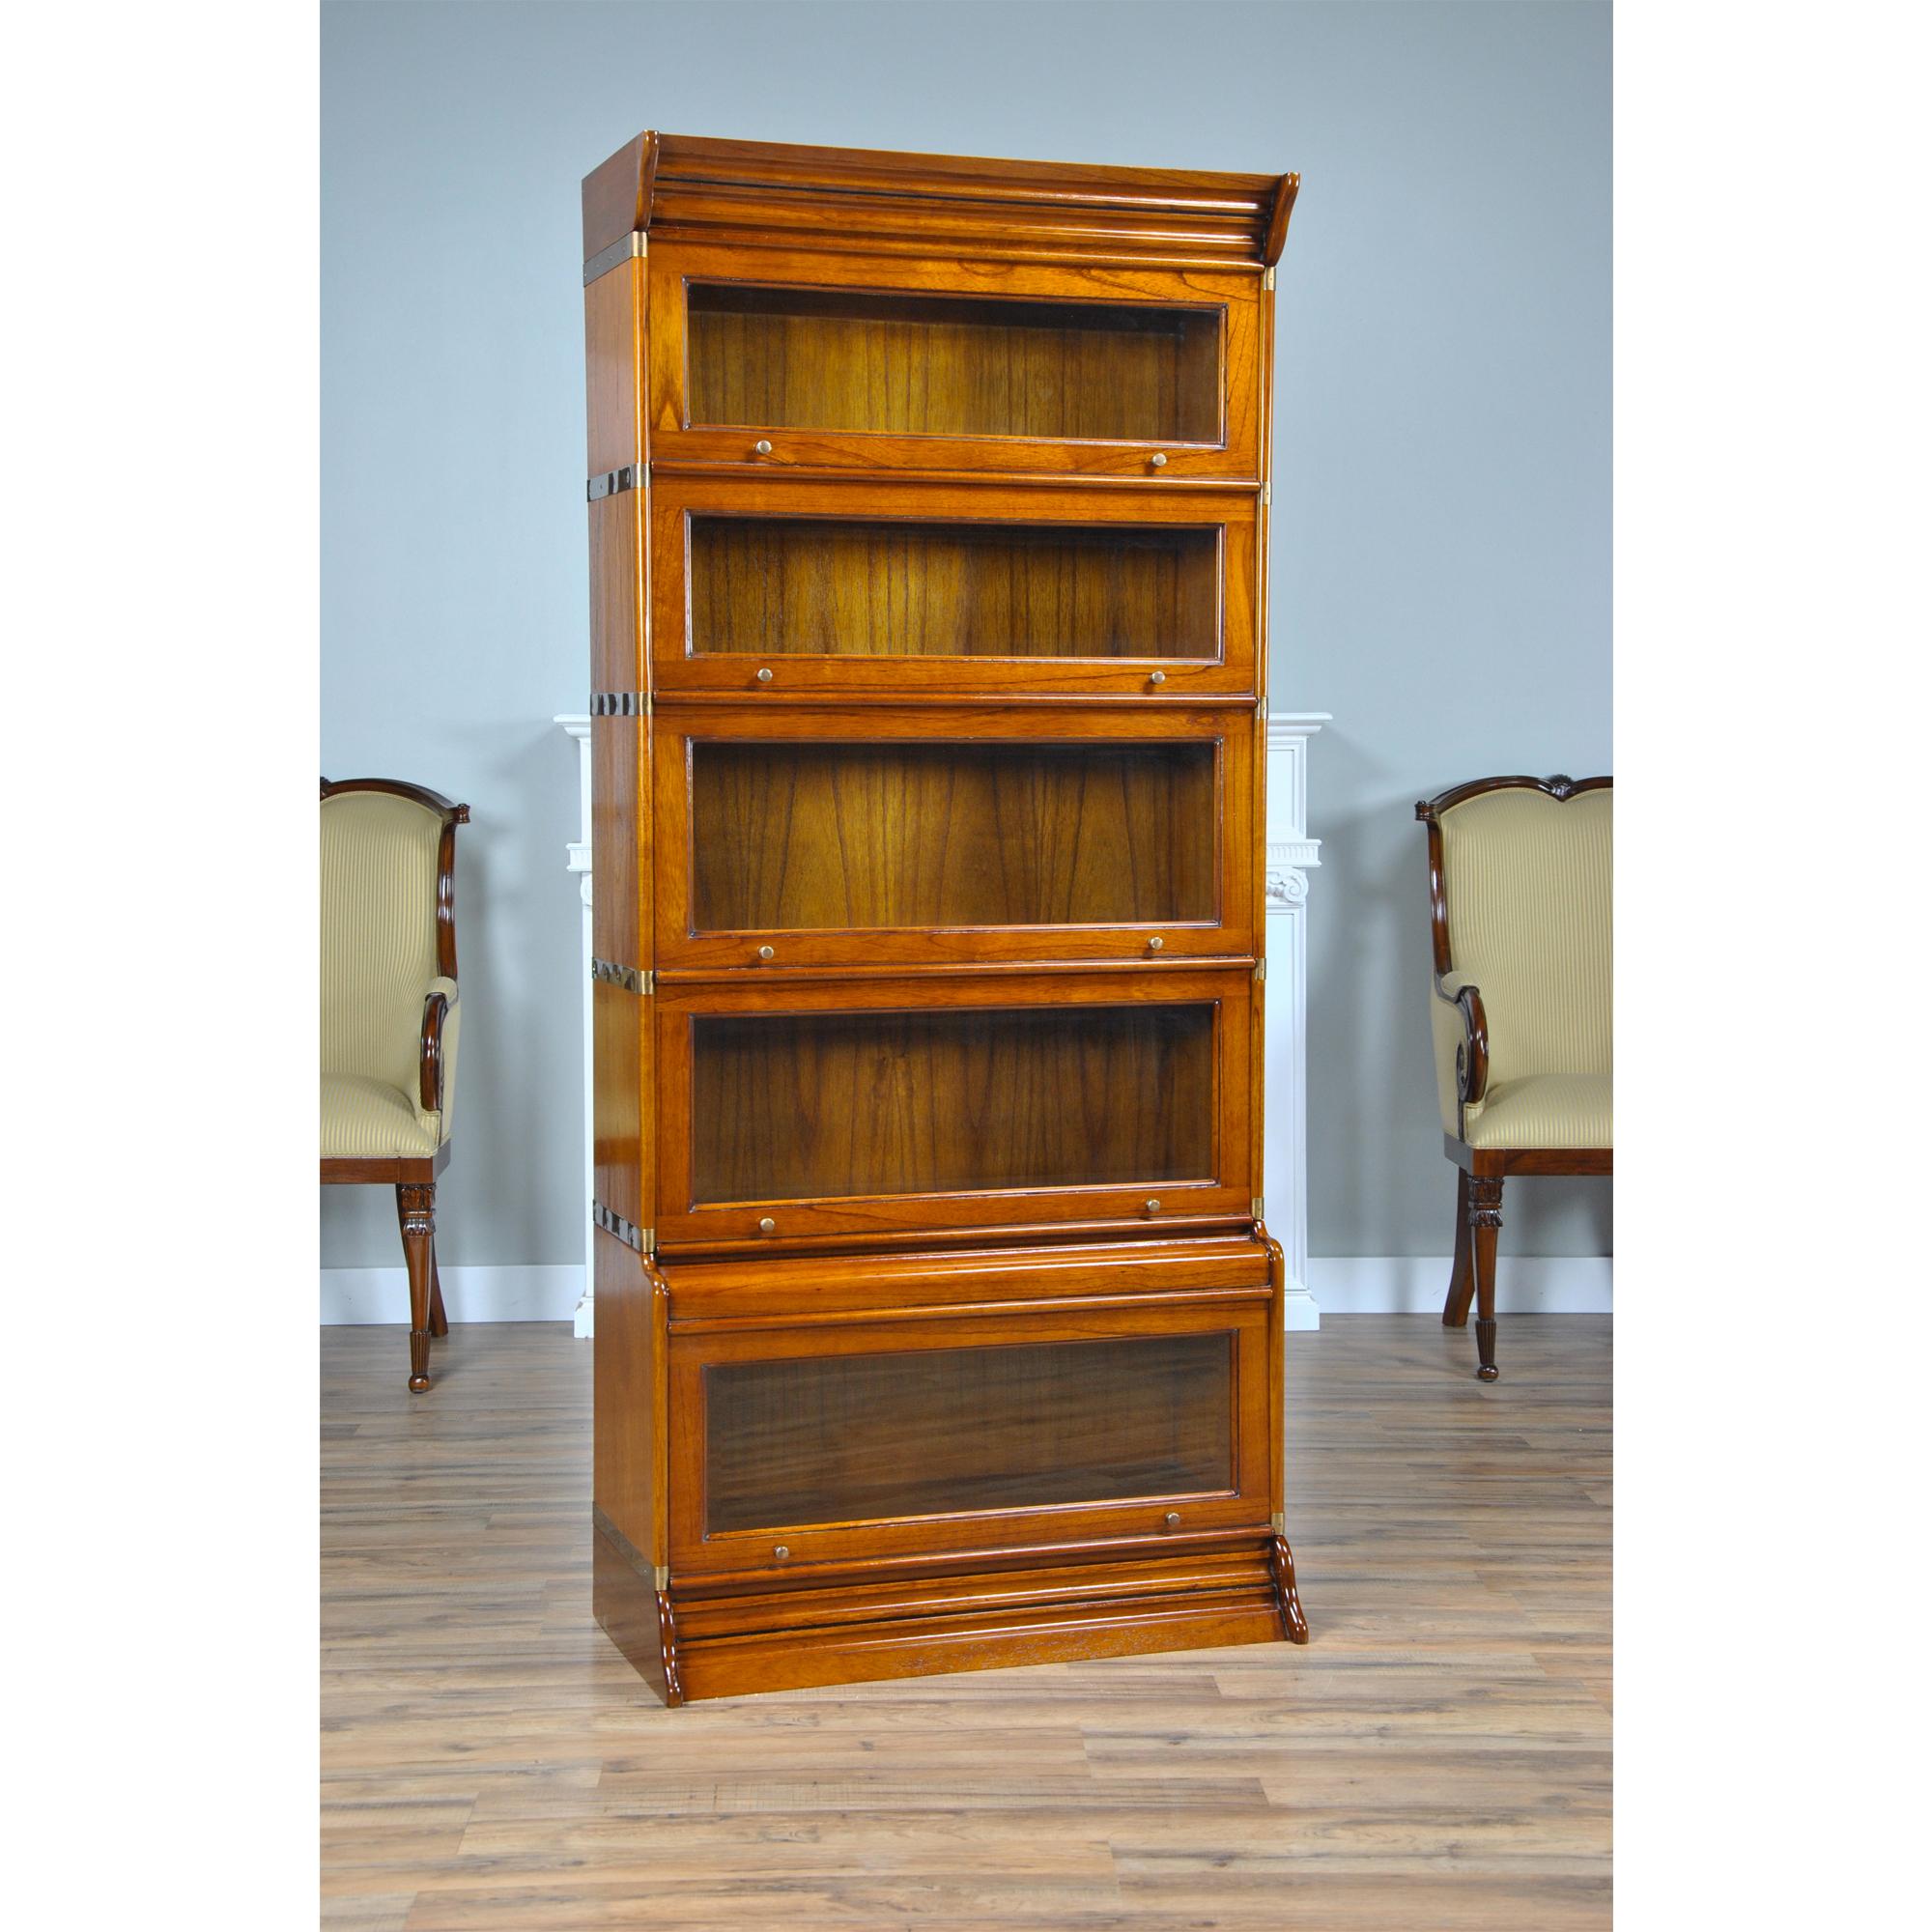 This great quality Stacking Bookcase from Niagara Furniture consists of seven separate pieces: a cap, a base and five glass sections. Beginning at the bottom; the oversized atlas sized base glass fronted section is a real bonus for all the larger